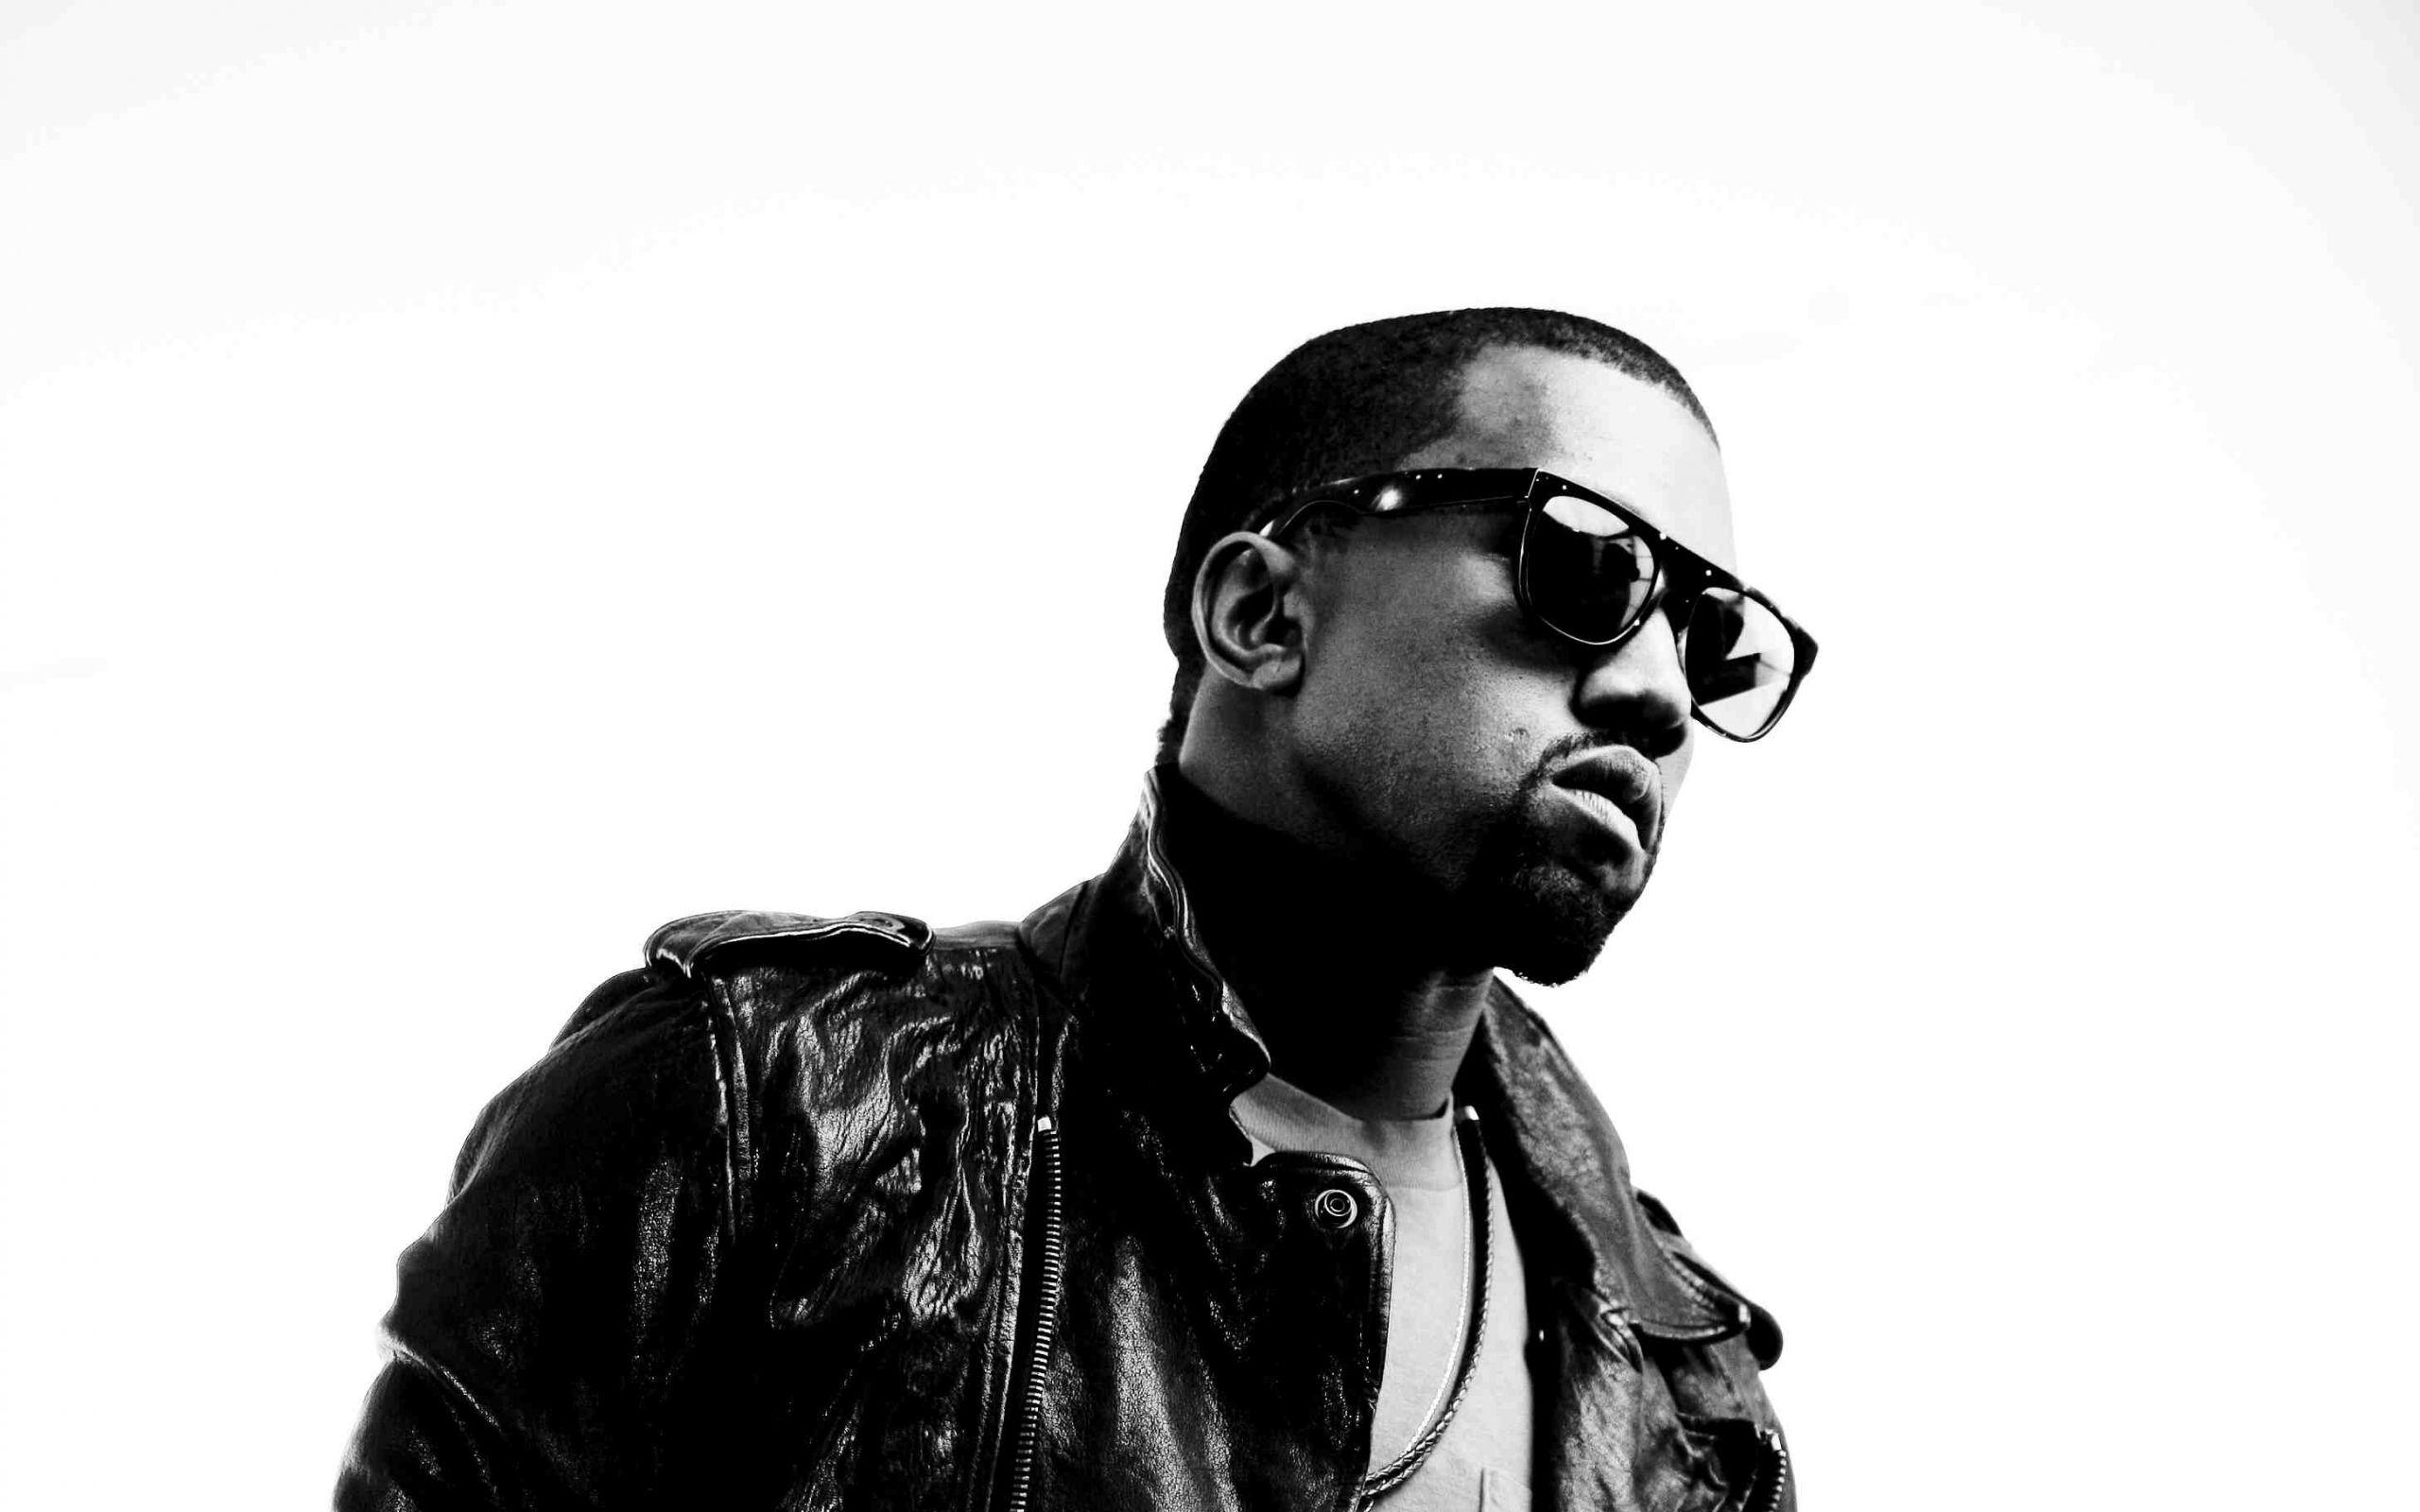 Kanye West 2014, High Definition, High Quality, Widescreen